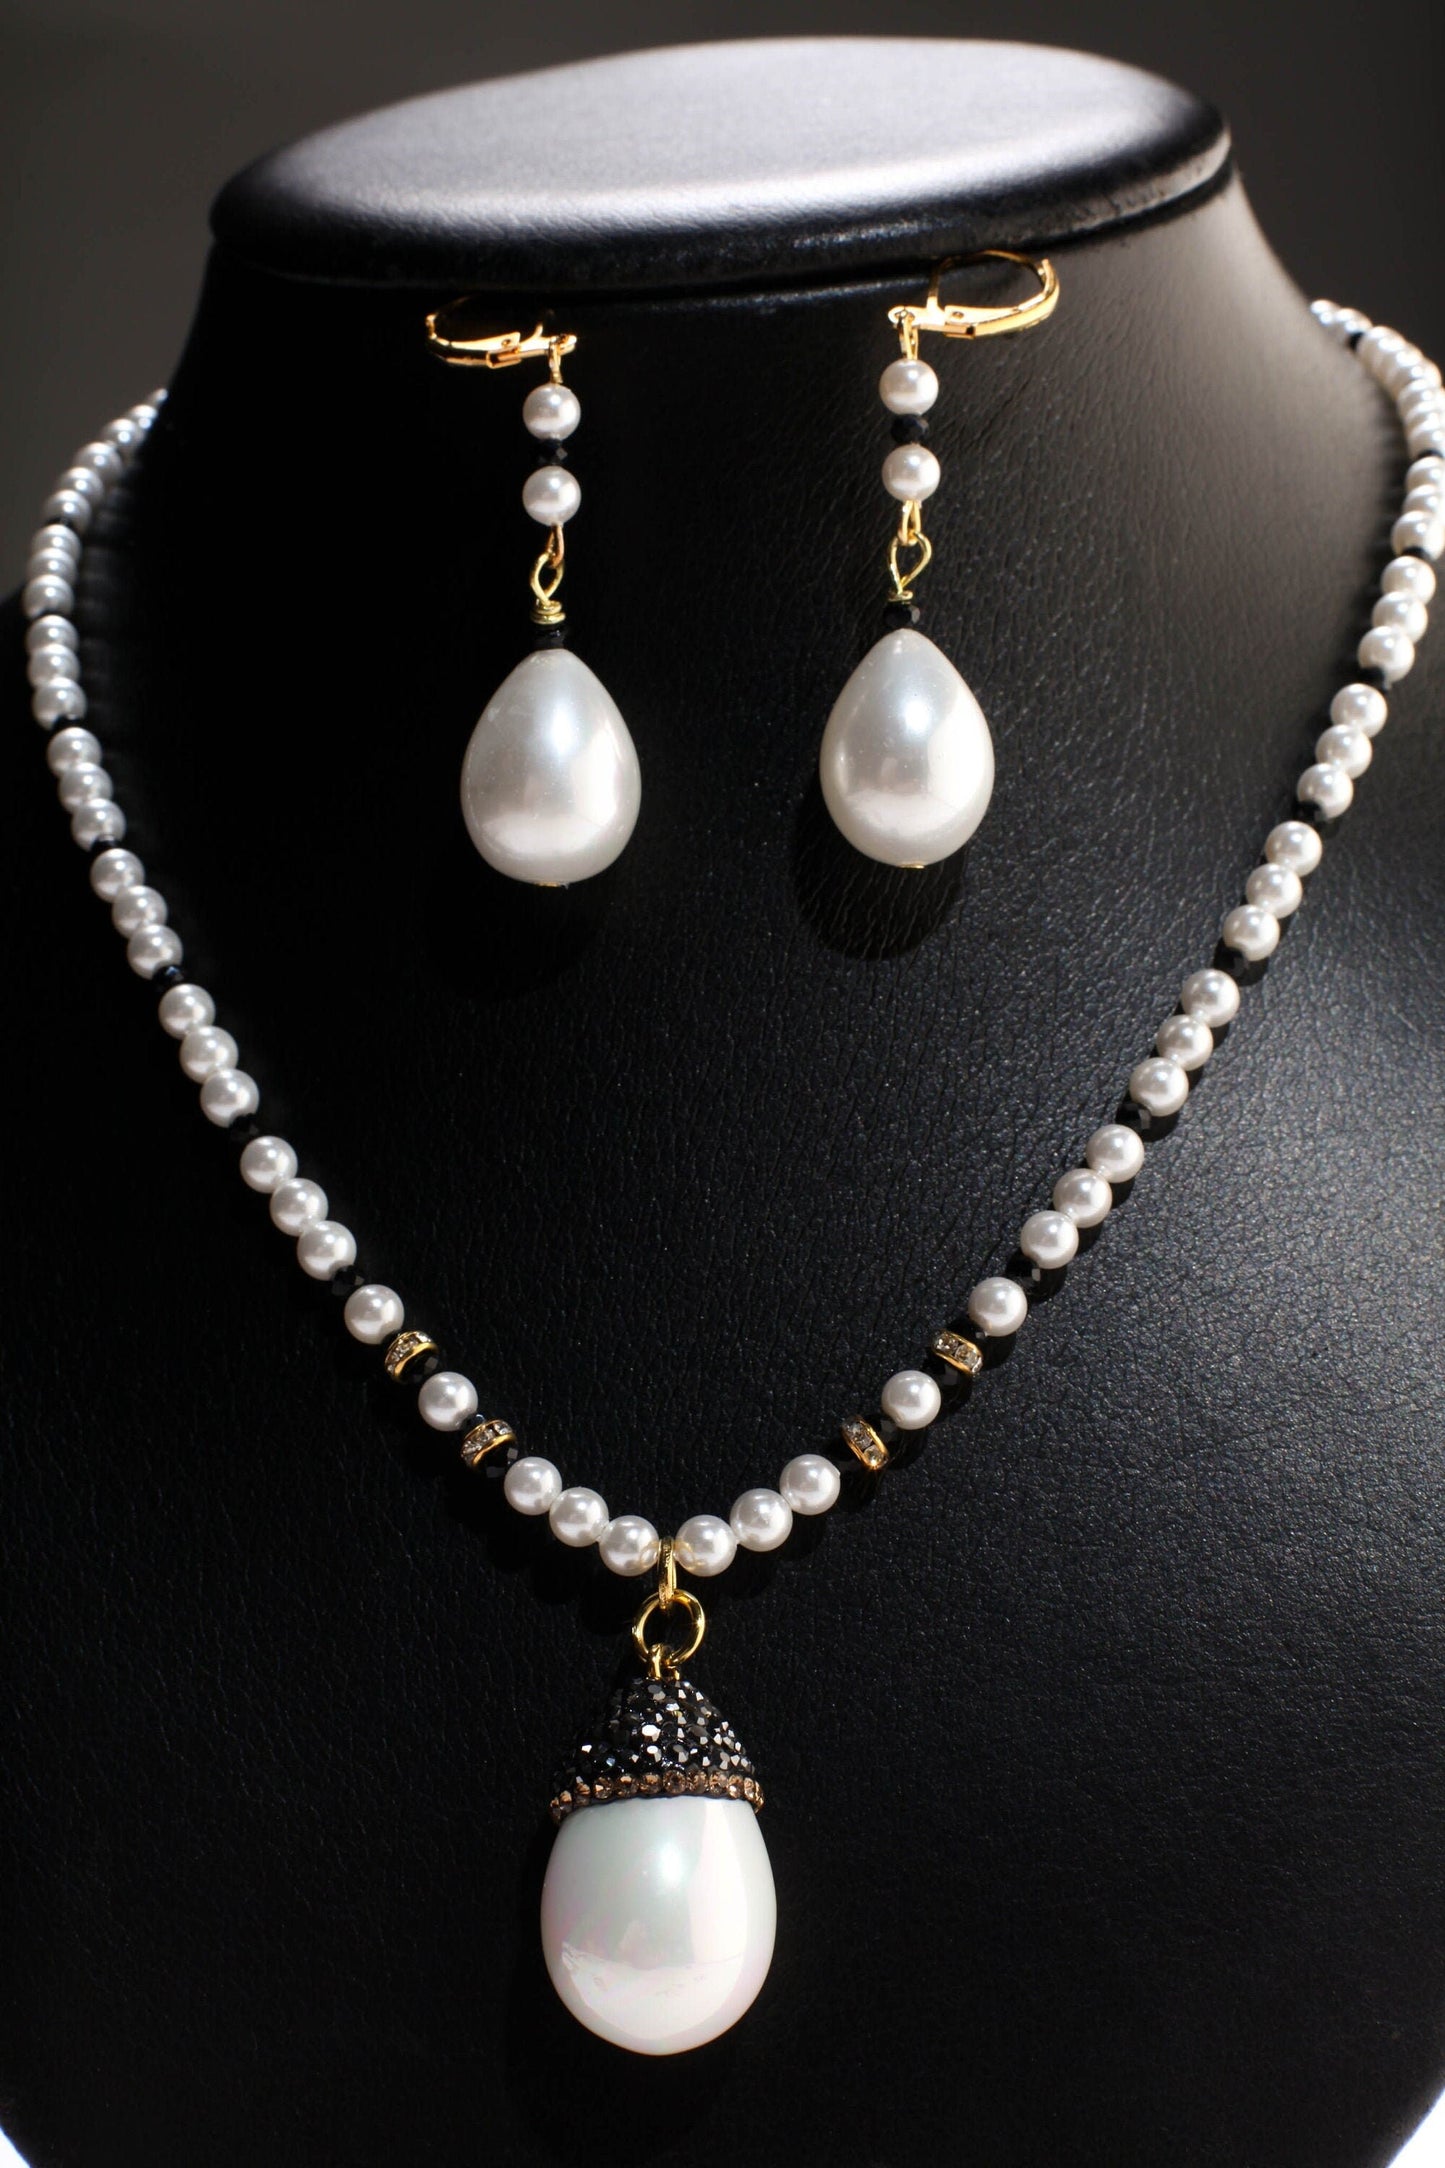 South Sea Shell Pearl Bridal Necklace, Tear Drop Pave Crystal Bead Cap Dangling Earrings Sets, Black Spinel Spacers, Gold Clasp Jewelry Set